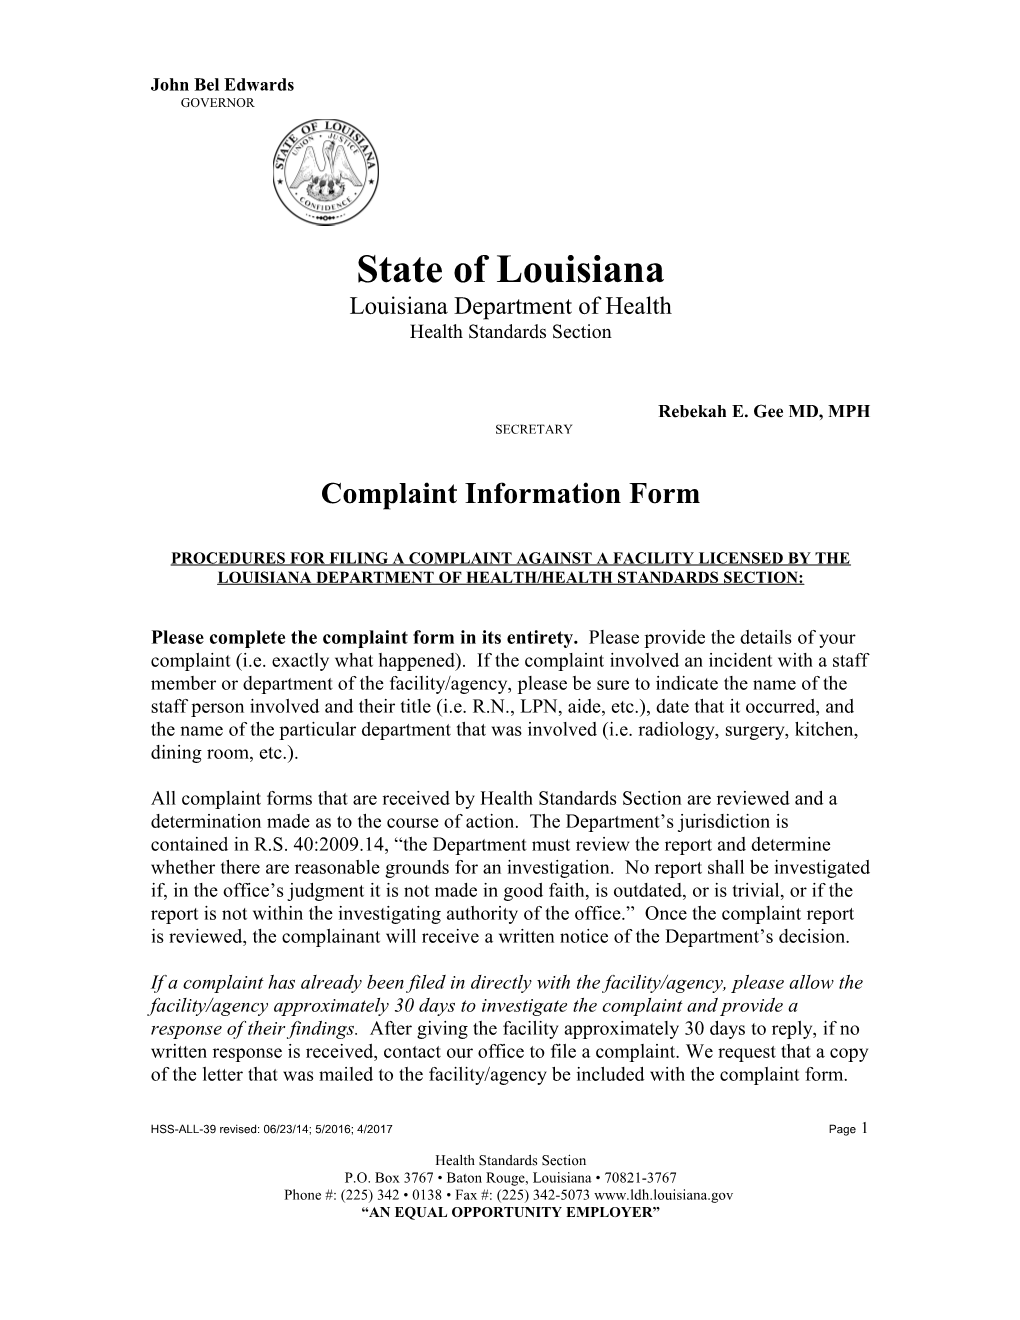 Procedures for Filing a Complaint Against a Facility Licensed by the Louisiana Department